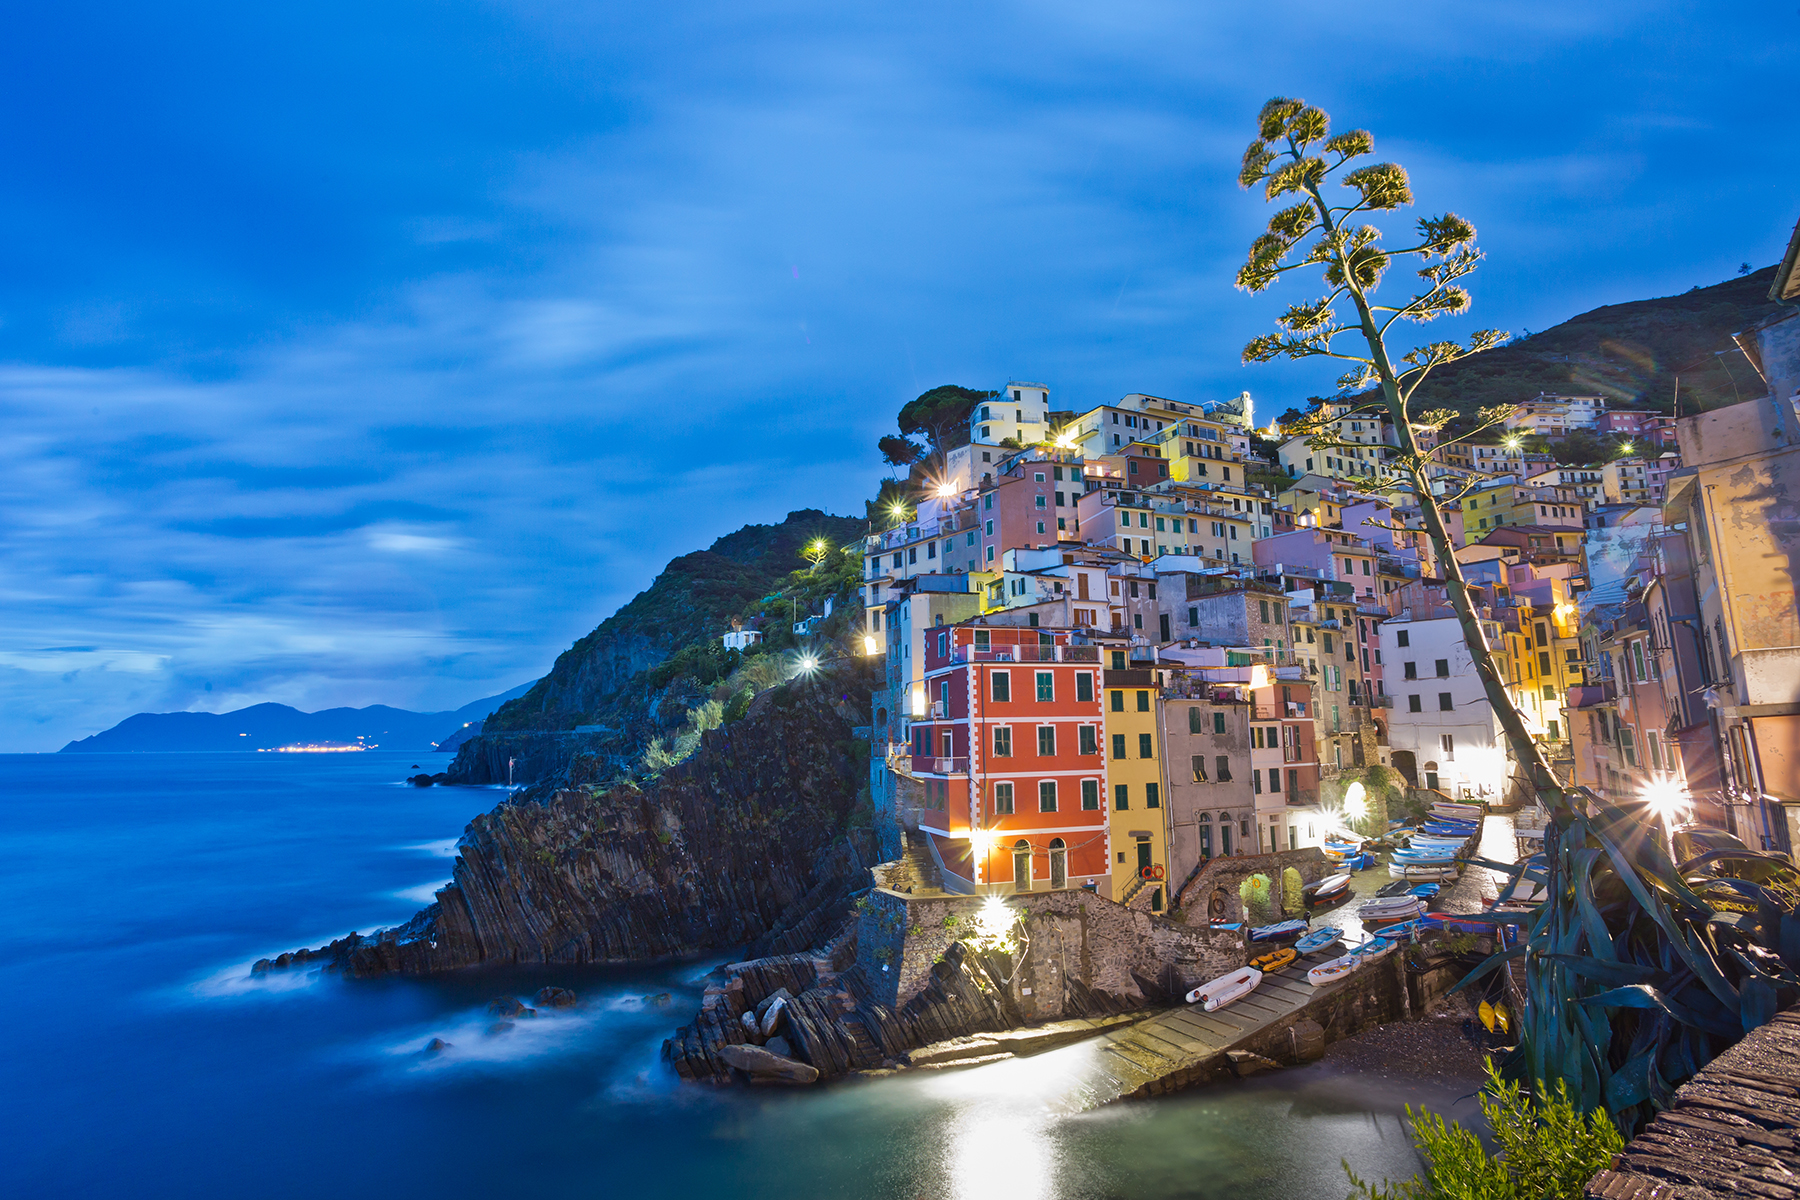 Rick Steves’ Europe The Cinque Terre or Italy’s Riviera Rick Steves